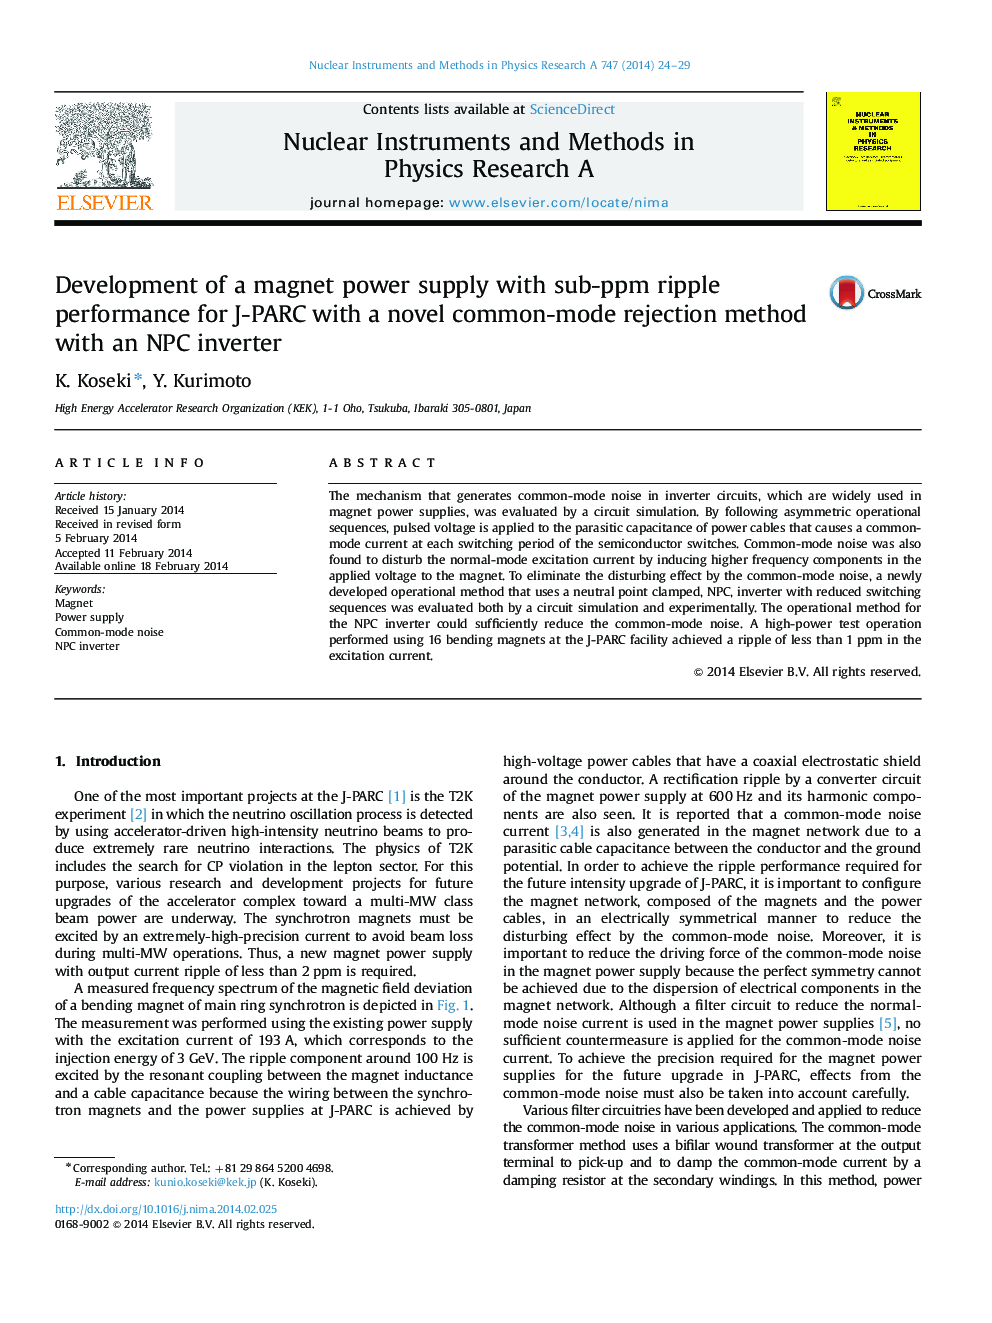 Development of a magnet power supply with sub-ppm ripple performance for J-PARC with a novel common-mode rejection method with an NPC inverter